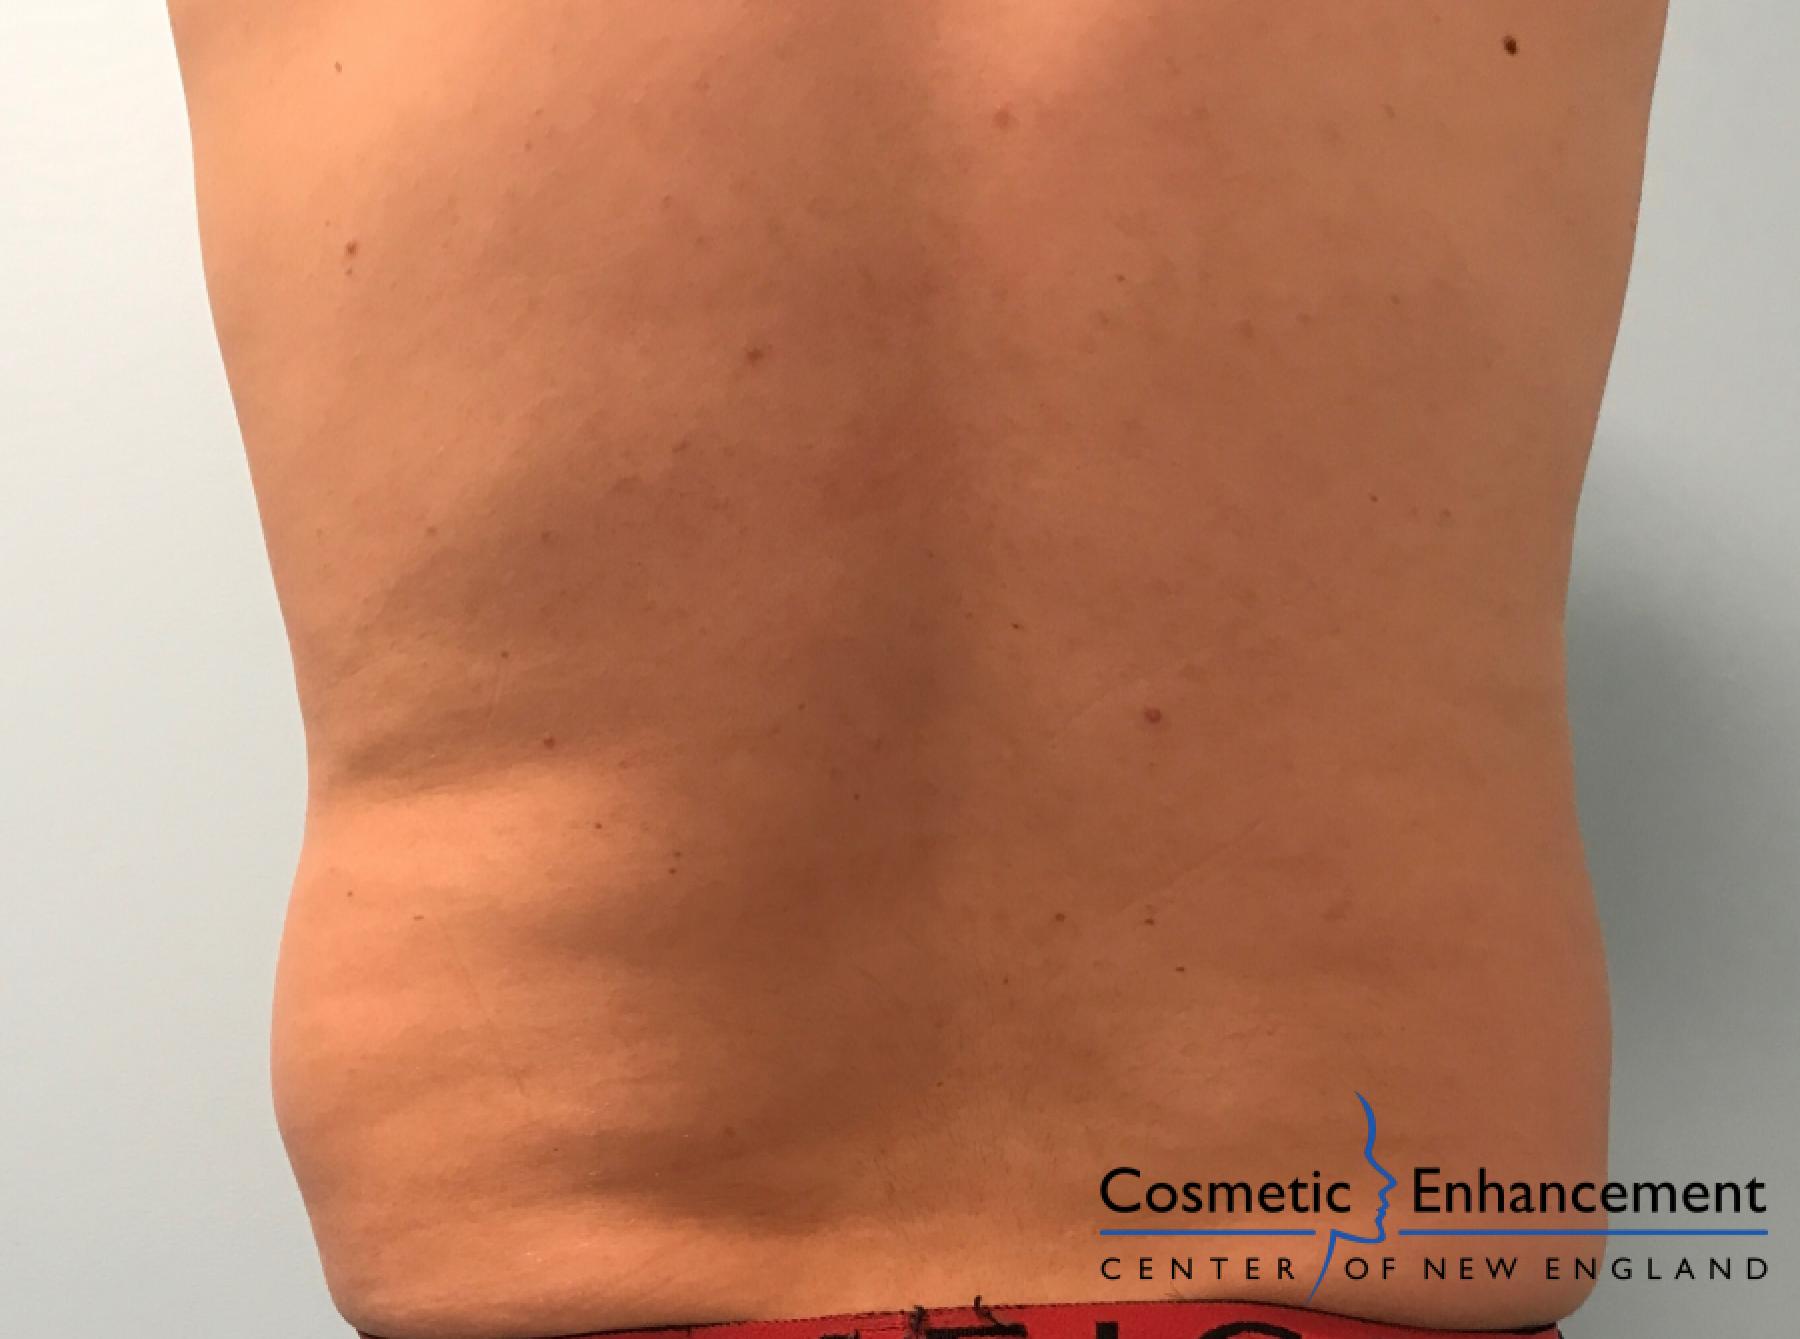 CoolSculpting®: Patient 7 - Before 